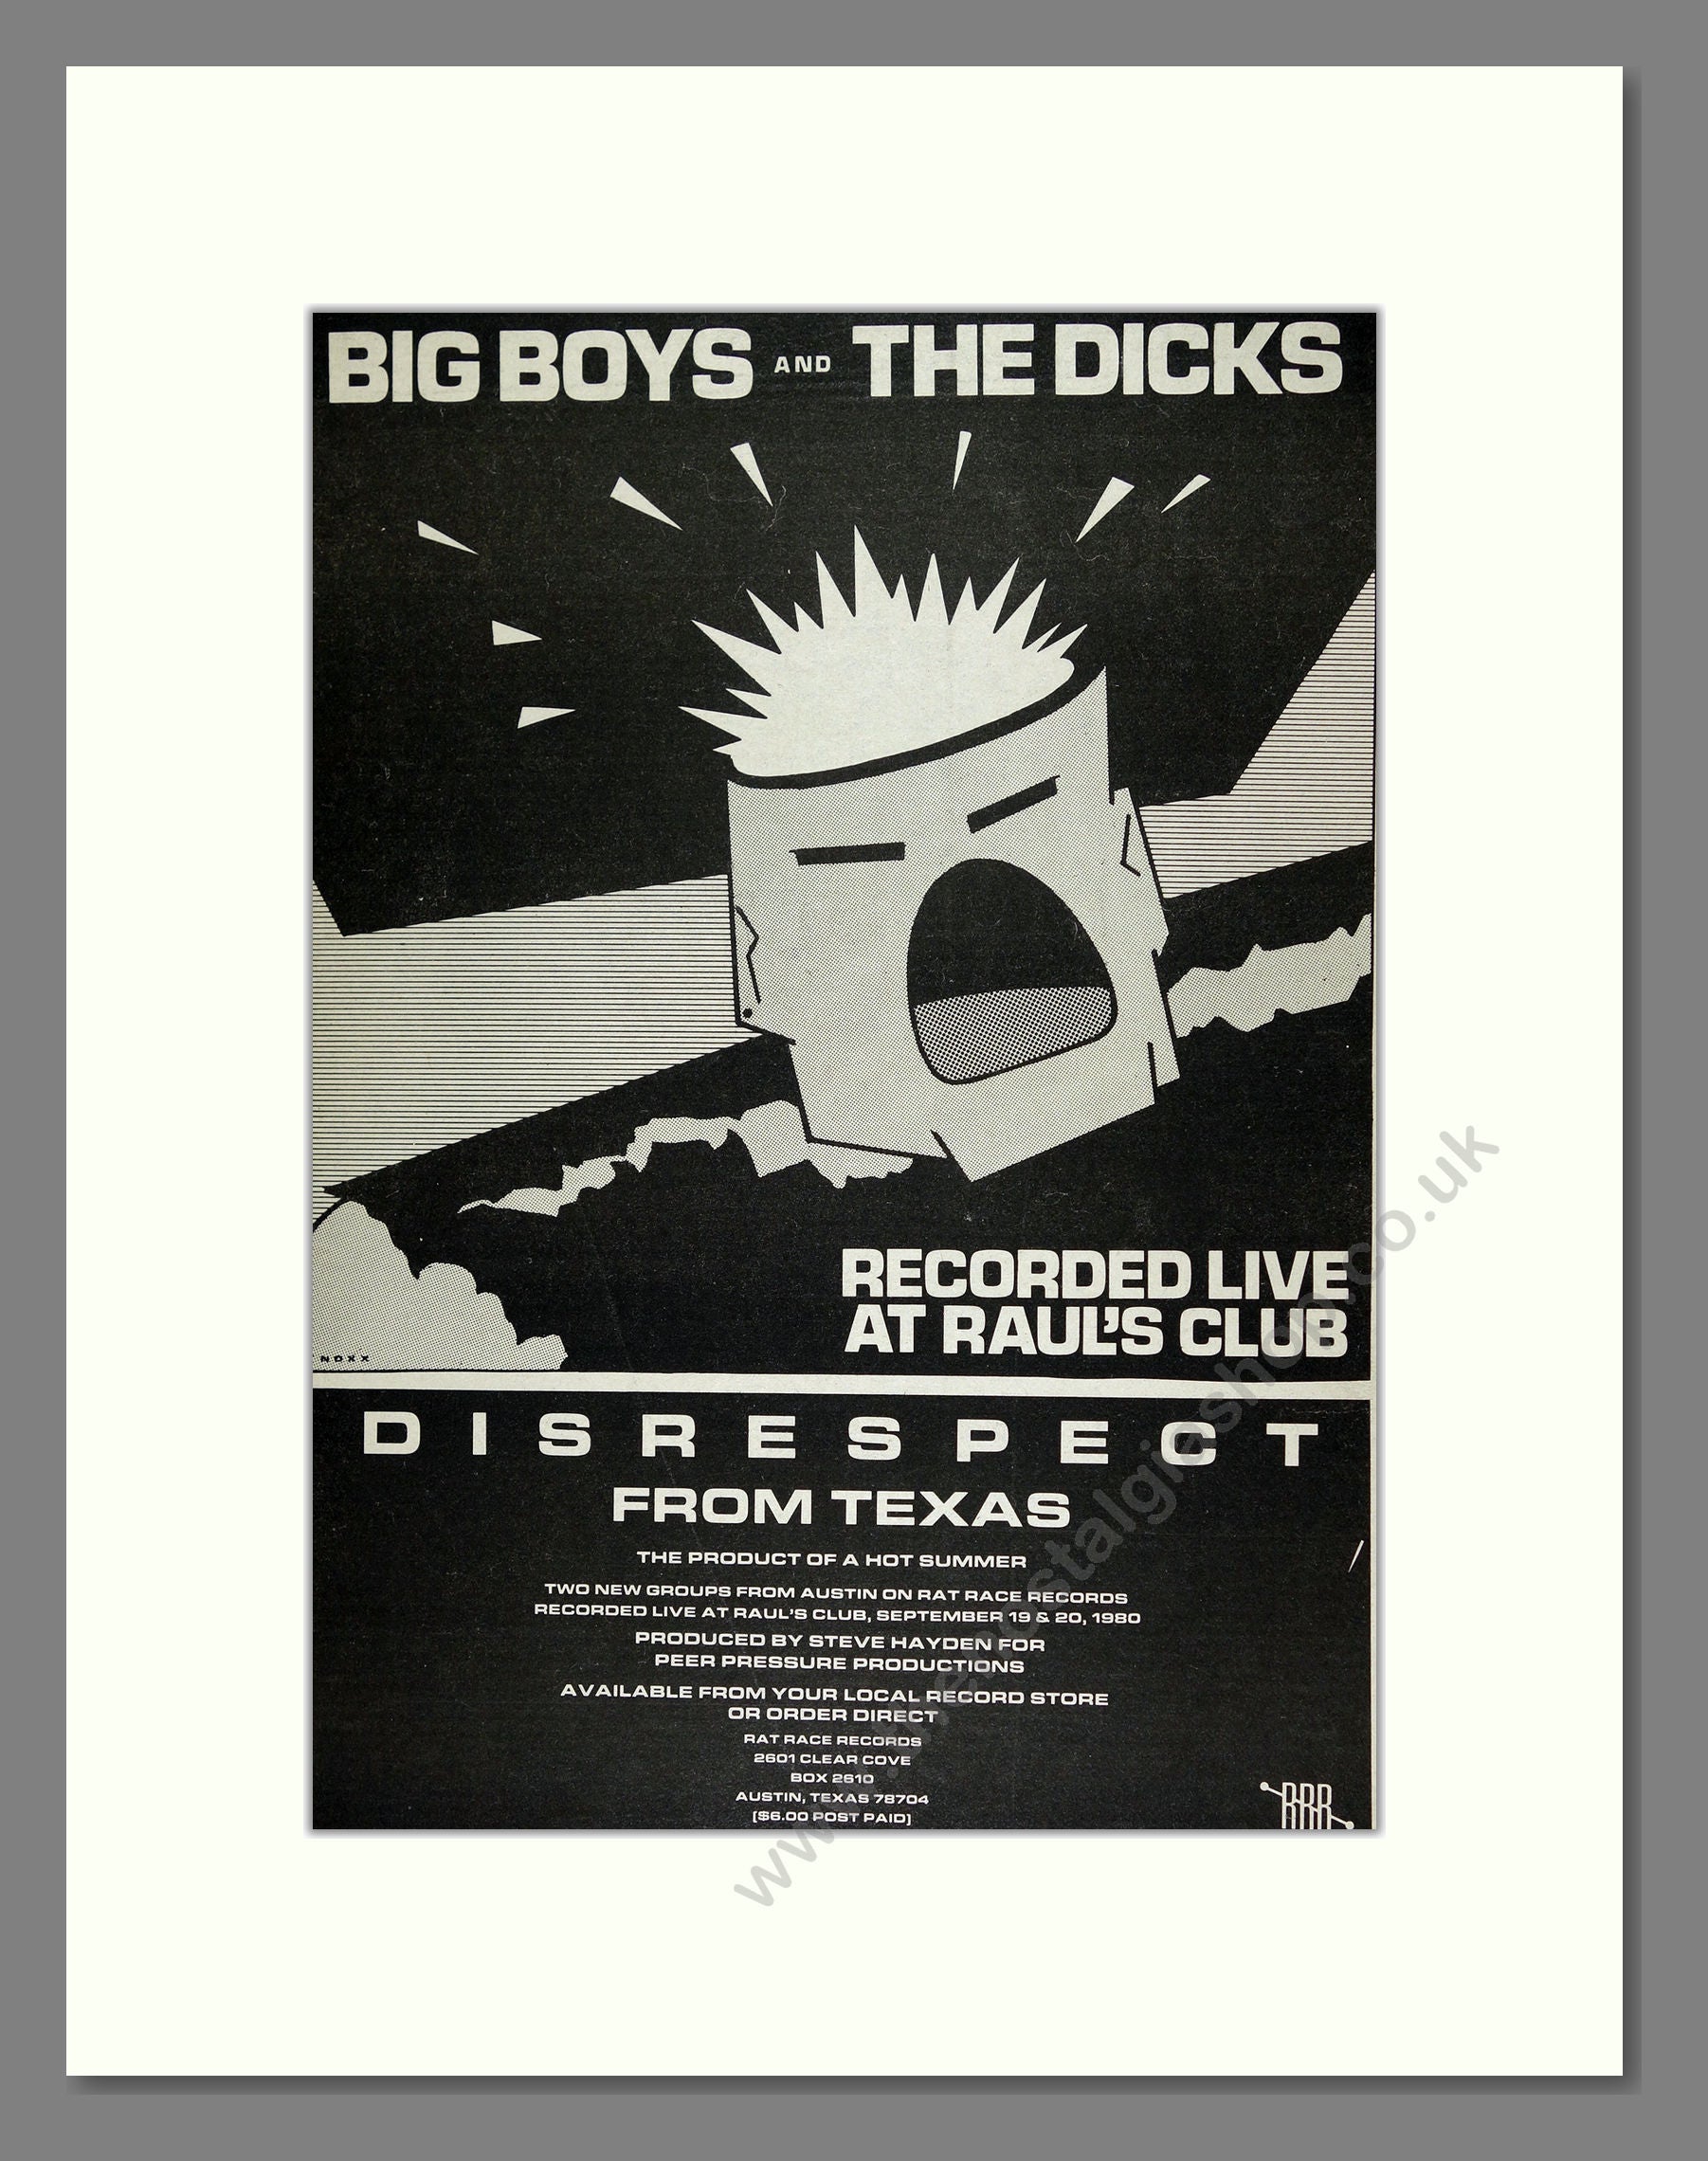 Big Boys and The Dicks - Live at Raul's Club. Vintage Advert 1981 (ref AD16183)